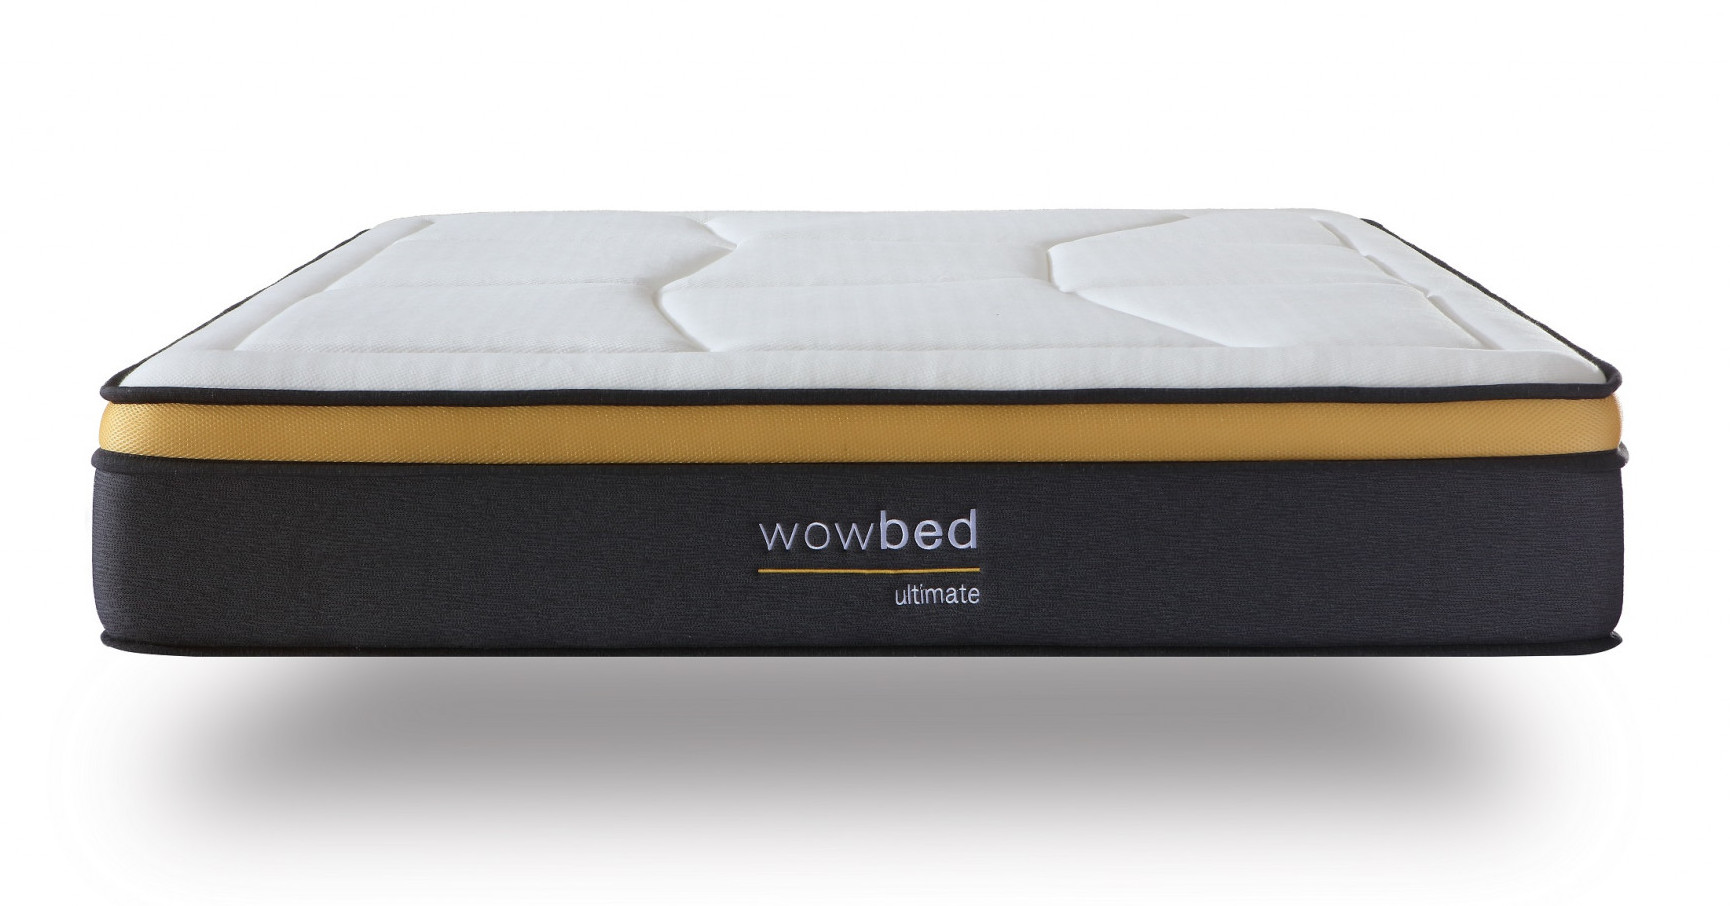 Wowbed Ultimate Mattress